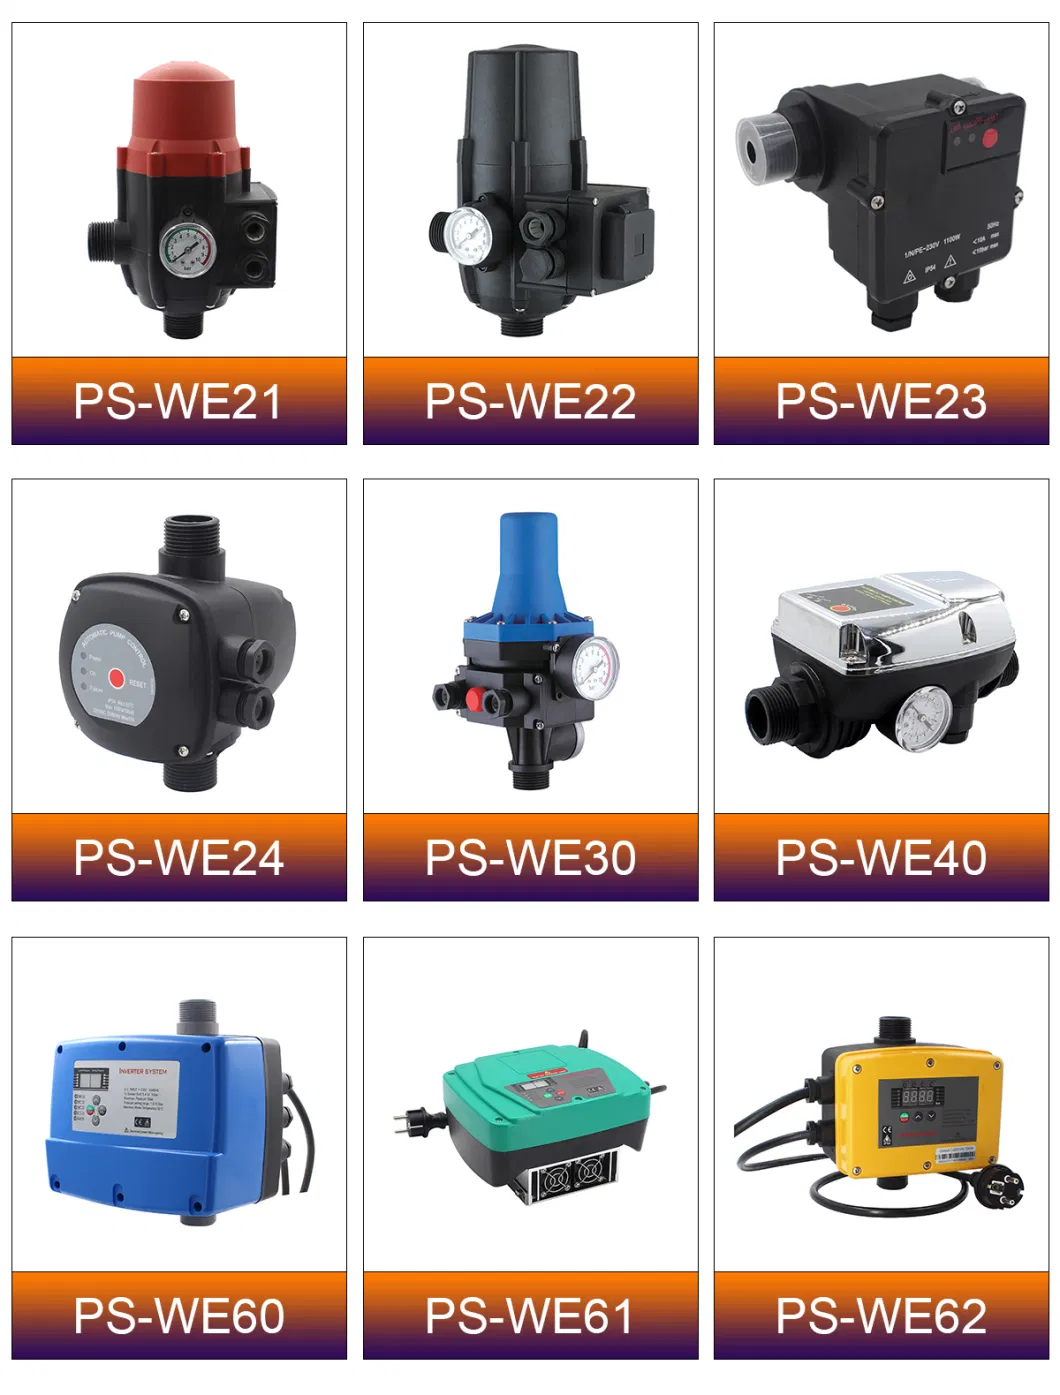 Water Pump with Automatic Pressure Switch Control